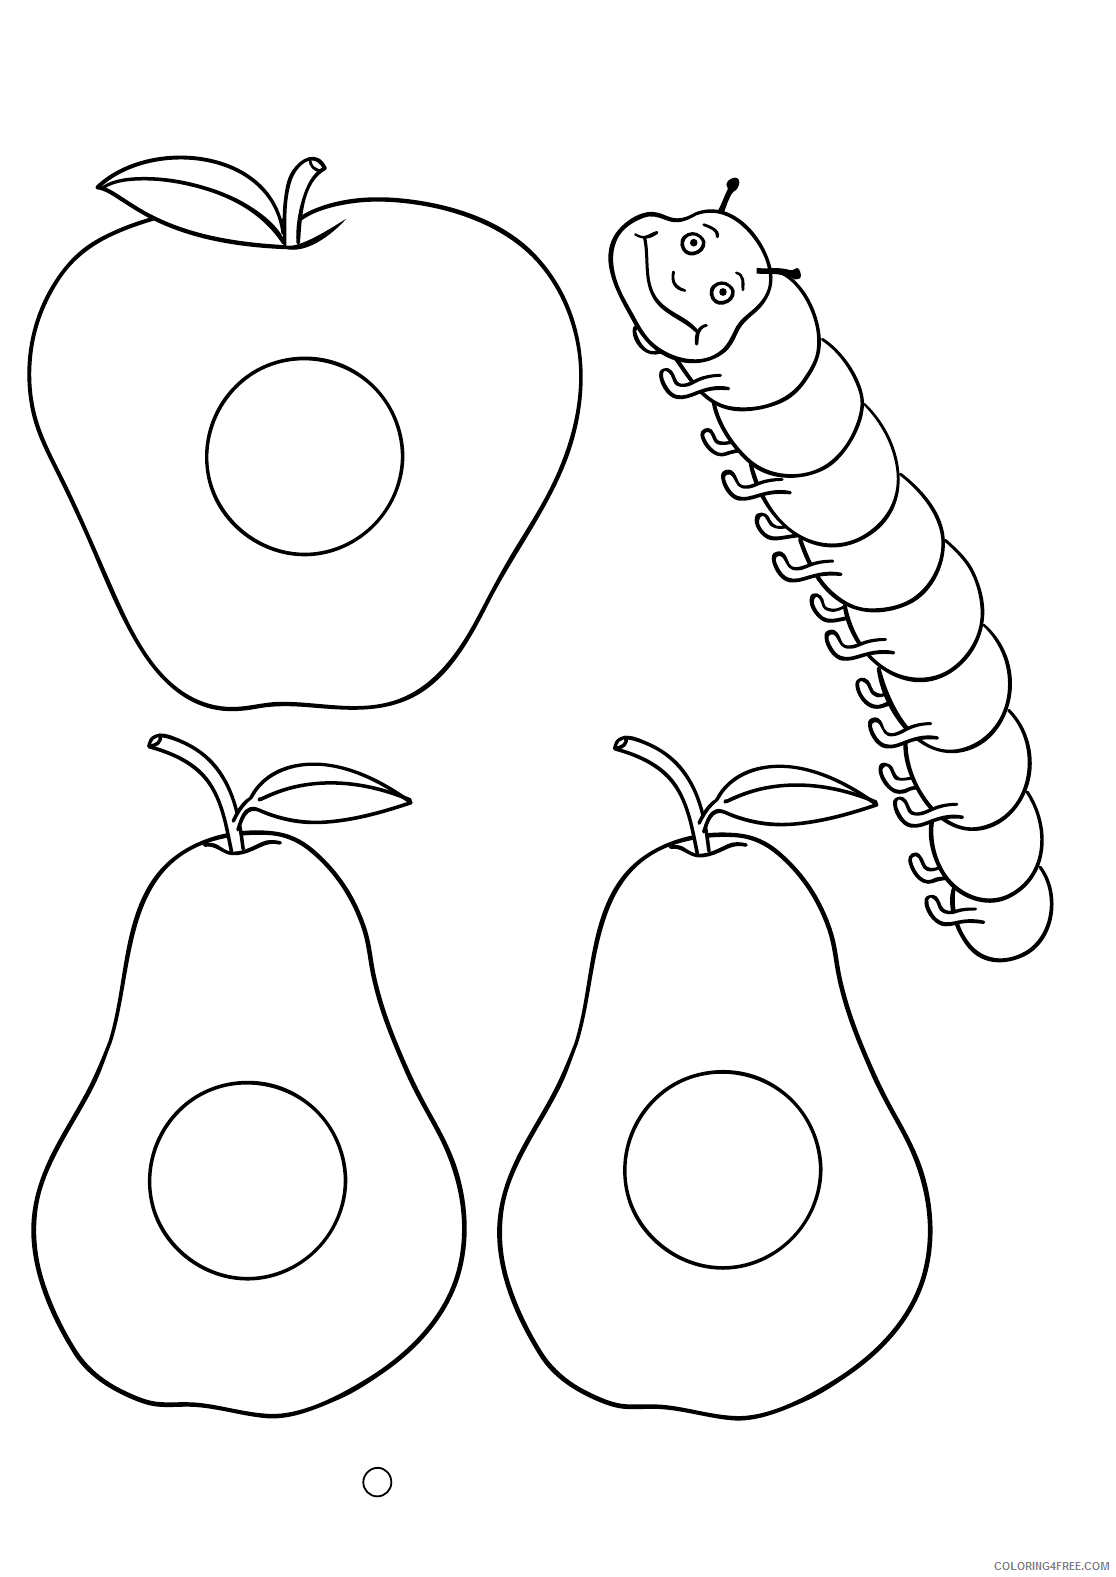 Caterpillar Coloring Pages Animal Printable Sheets Caterpillar Free For Kids 2021 Coloring4free